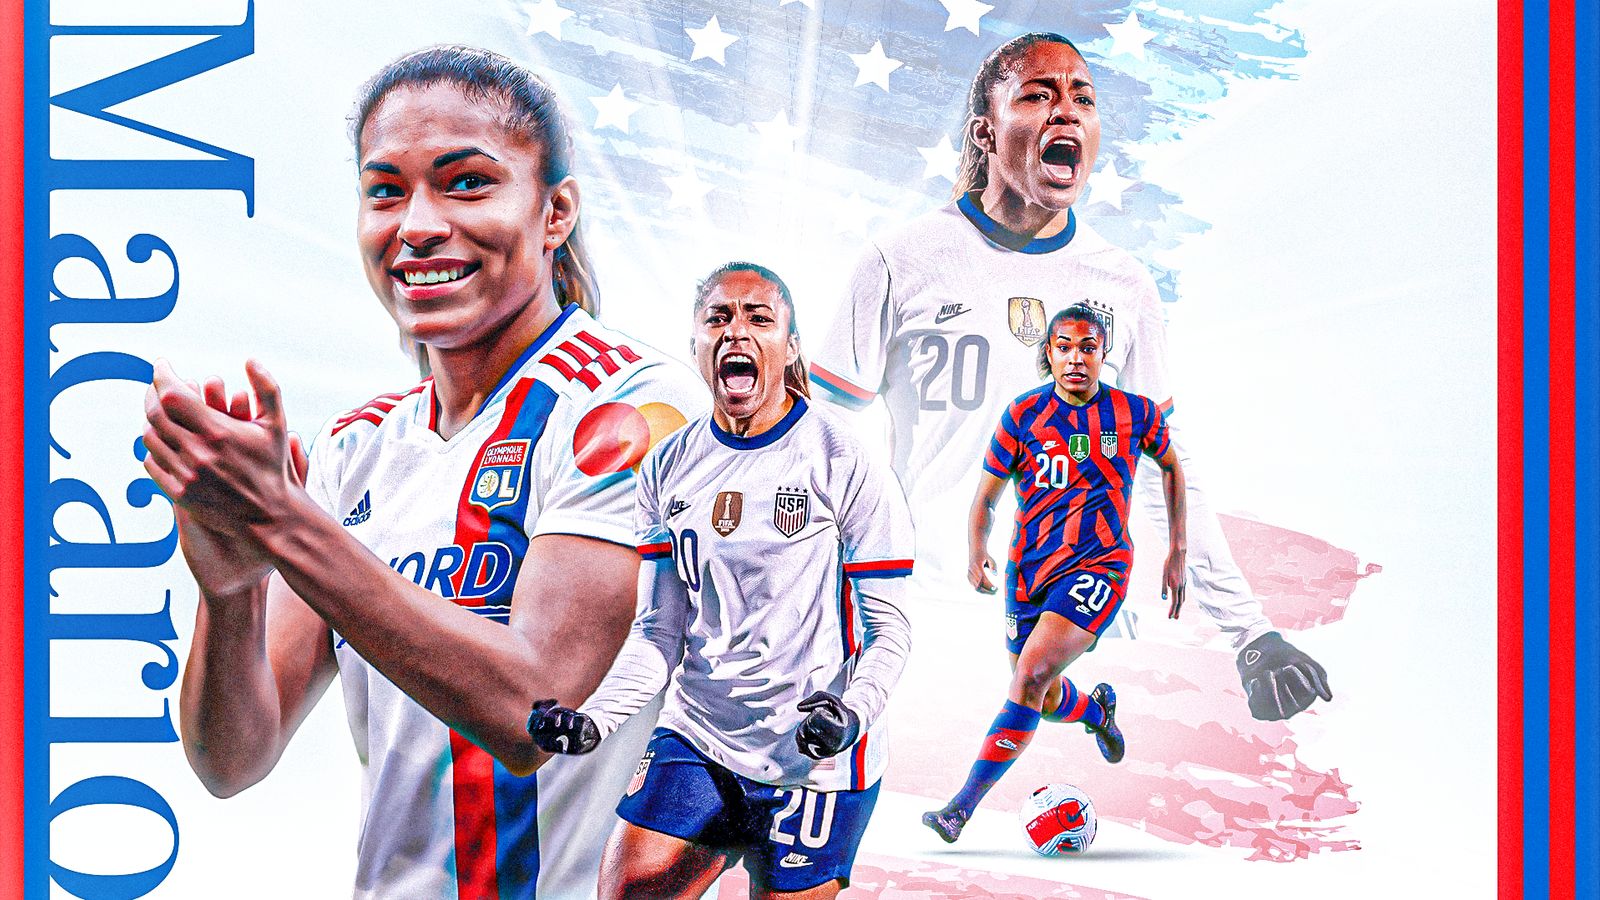 Lyon vs Barcelona: Catarina Macario says Women’s Champions League Final will be “one for the history books”